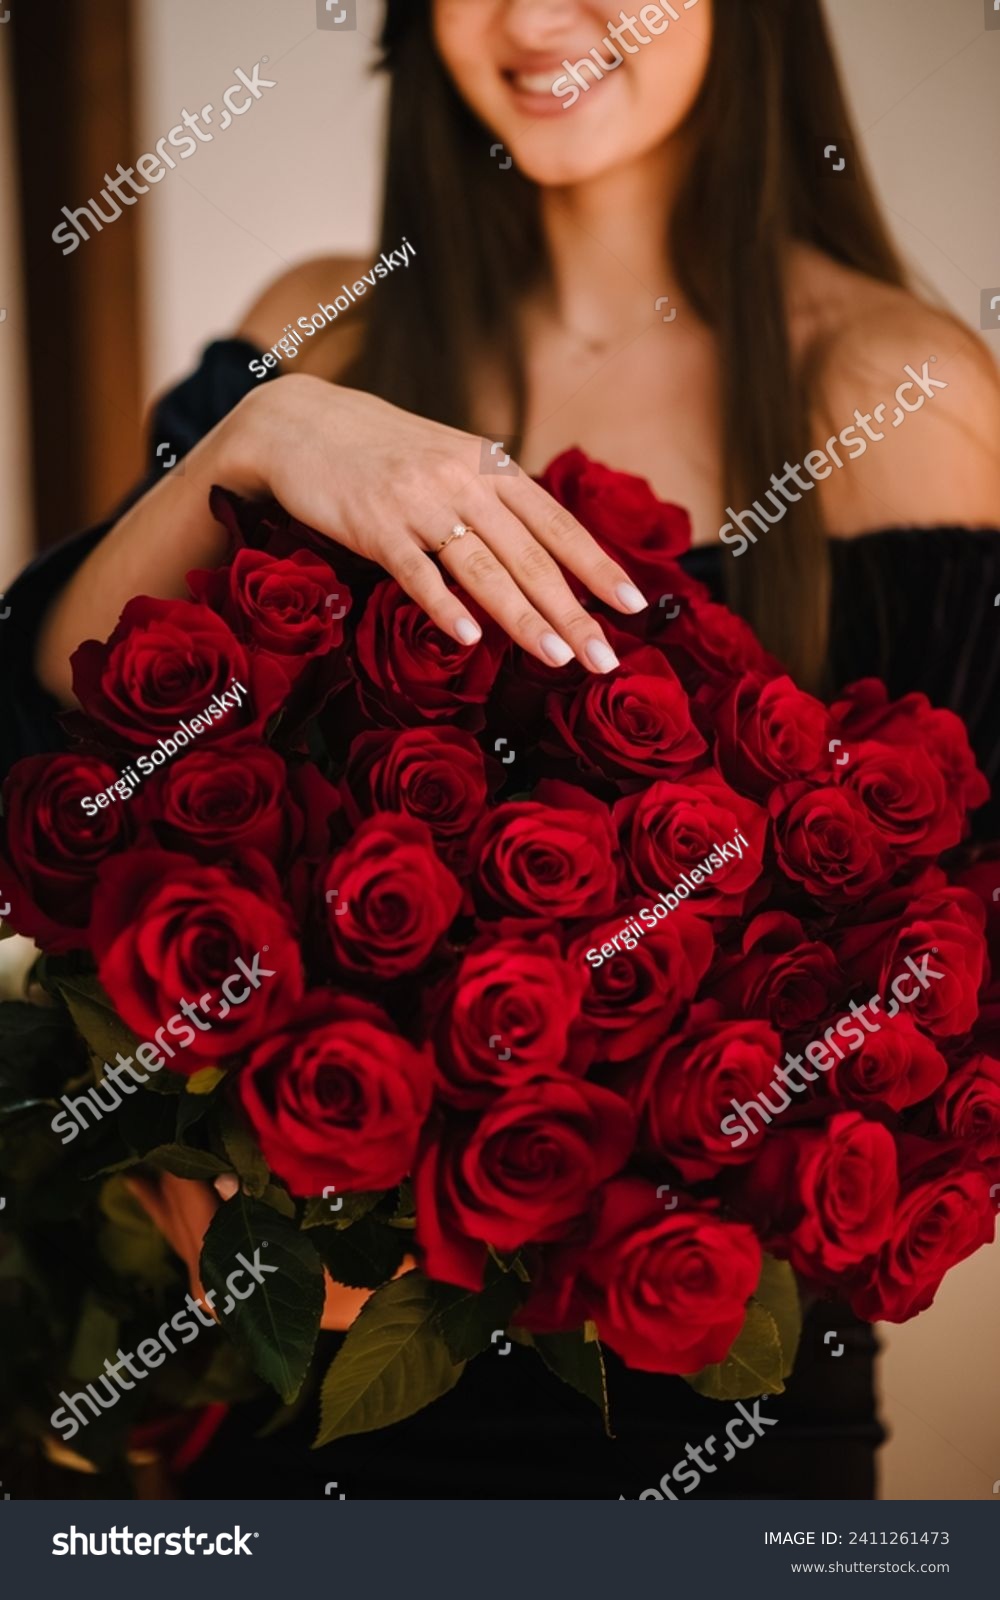 Engagement ring. Marriage proposal. Elegant floral template for design for Valentine's Day. A girl's hand with a wedding ring on a big bouquet of red roses. Love concept. Closeup. Side view. #2411261473